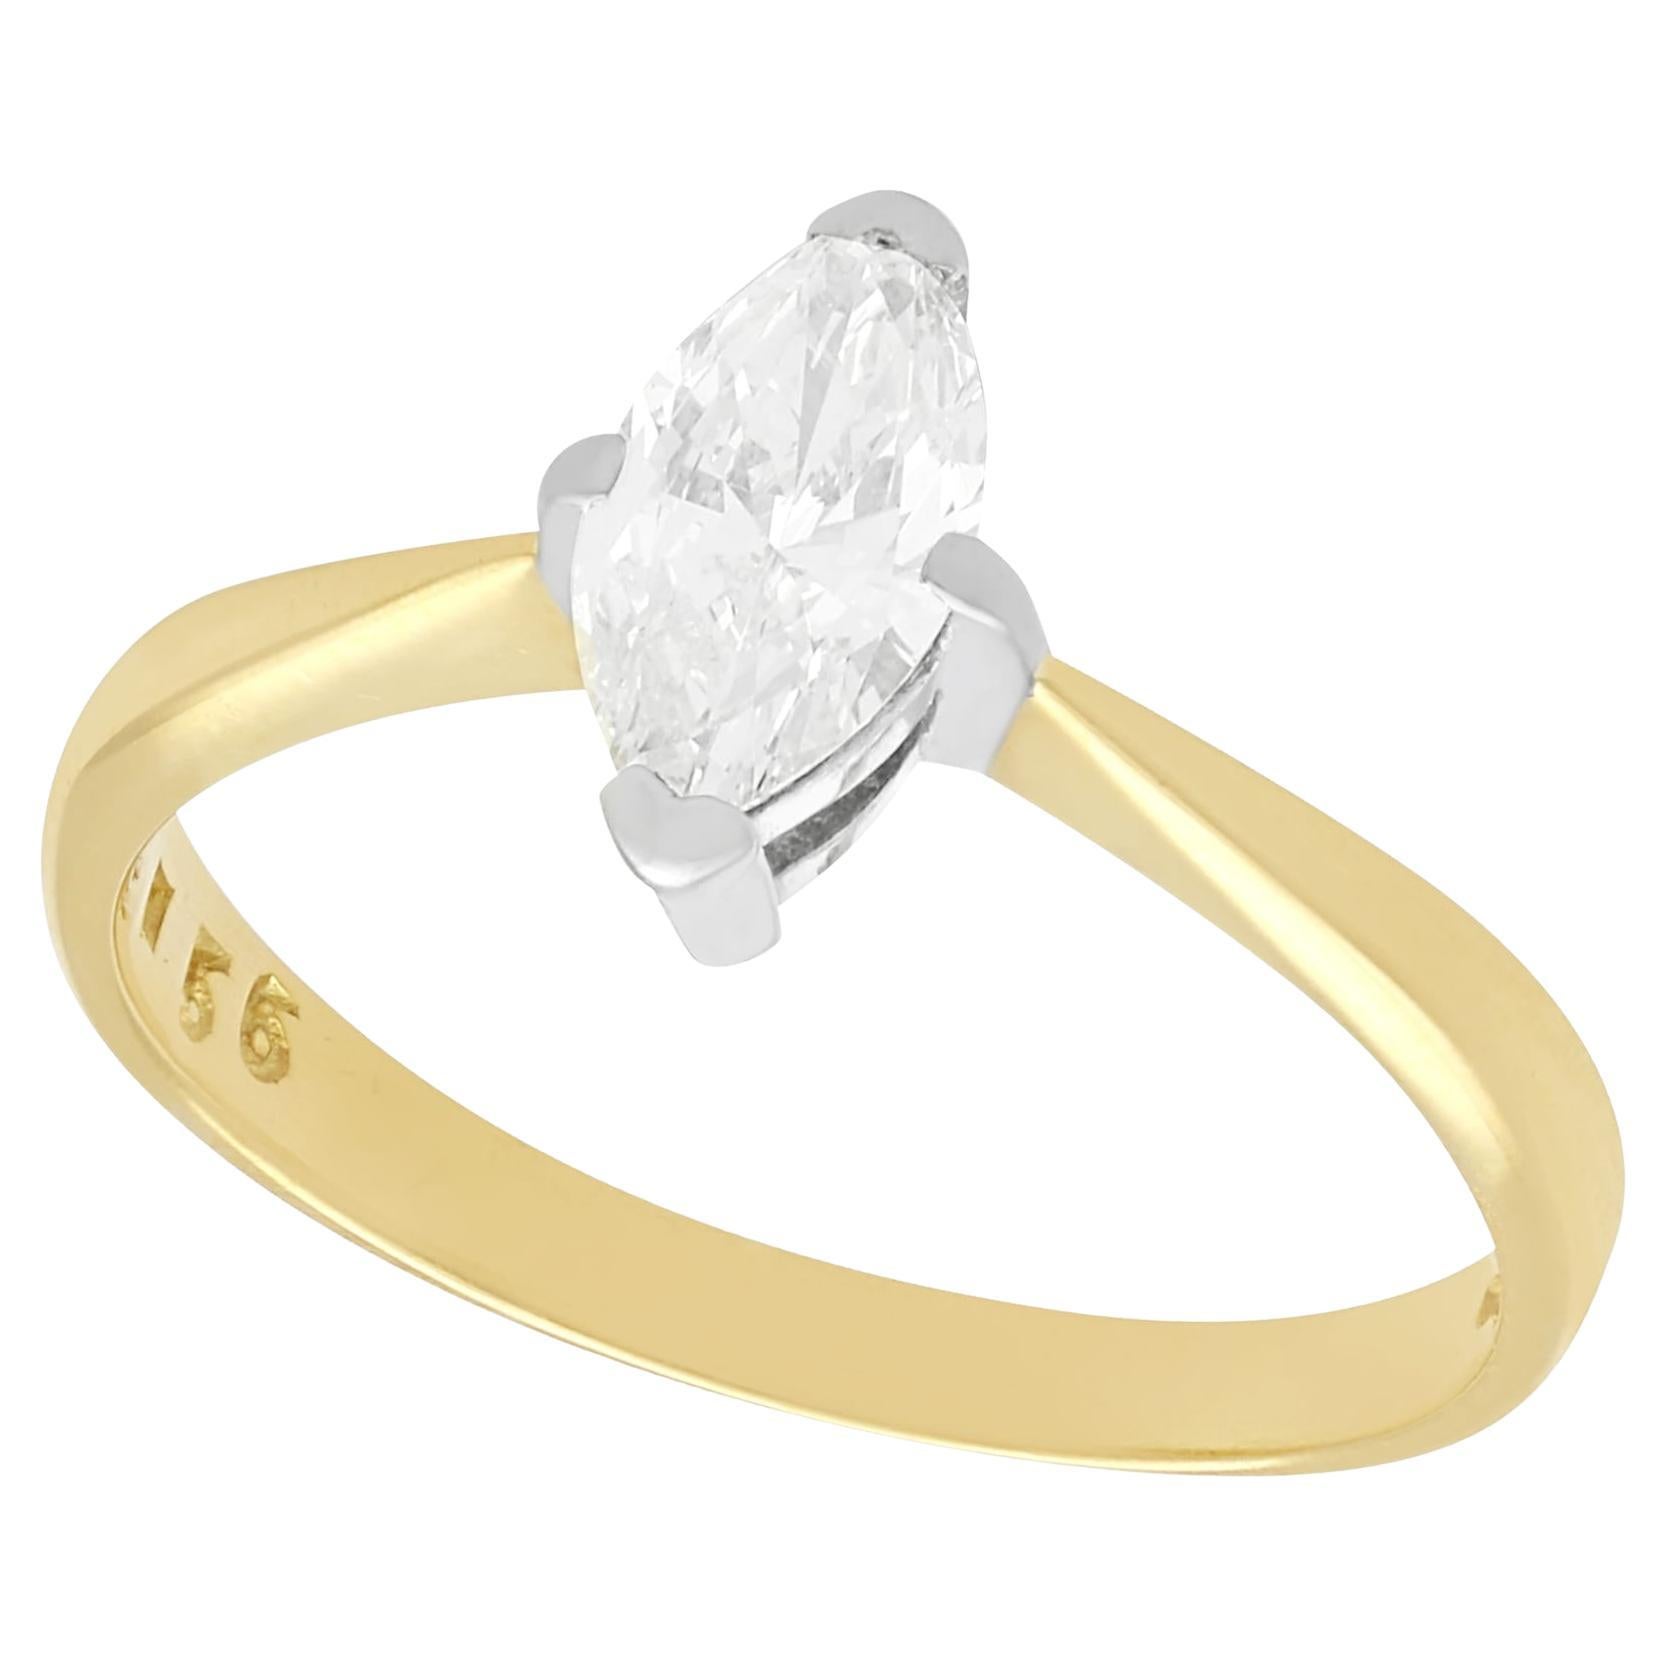 1990s Diamond and Yellow Gold Solitaire Engagement Ring